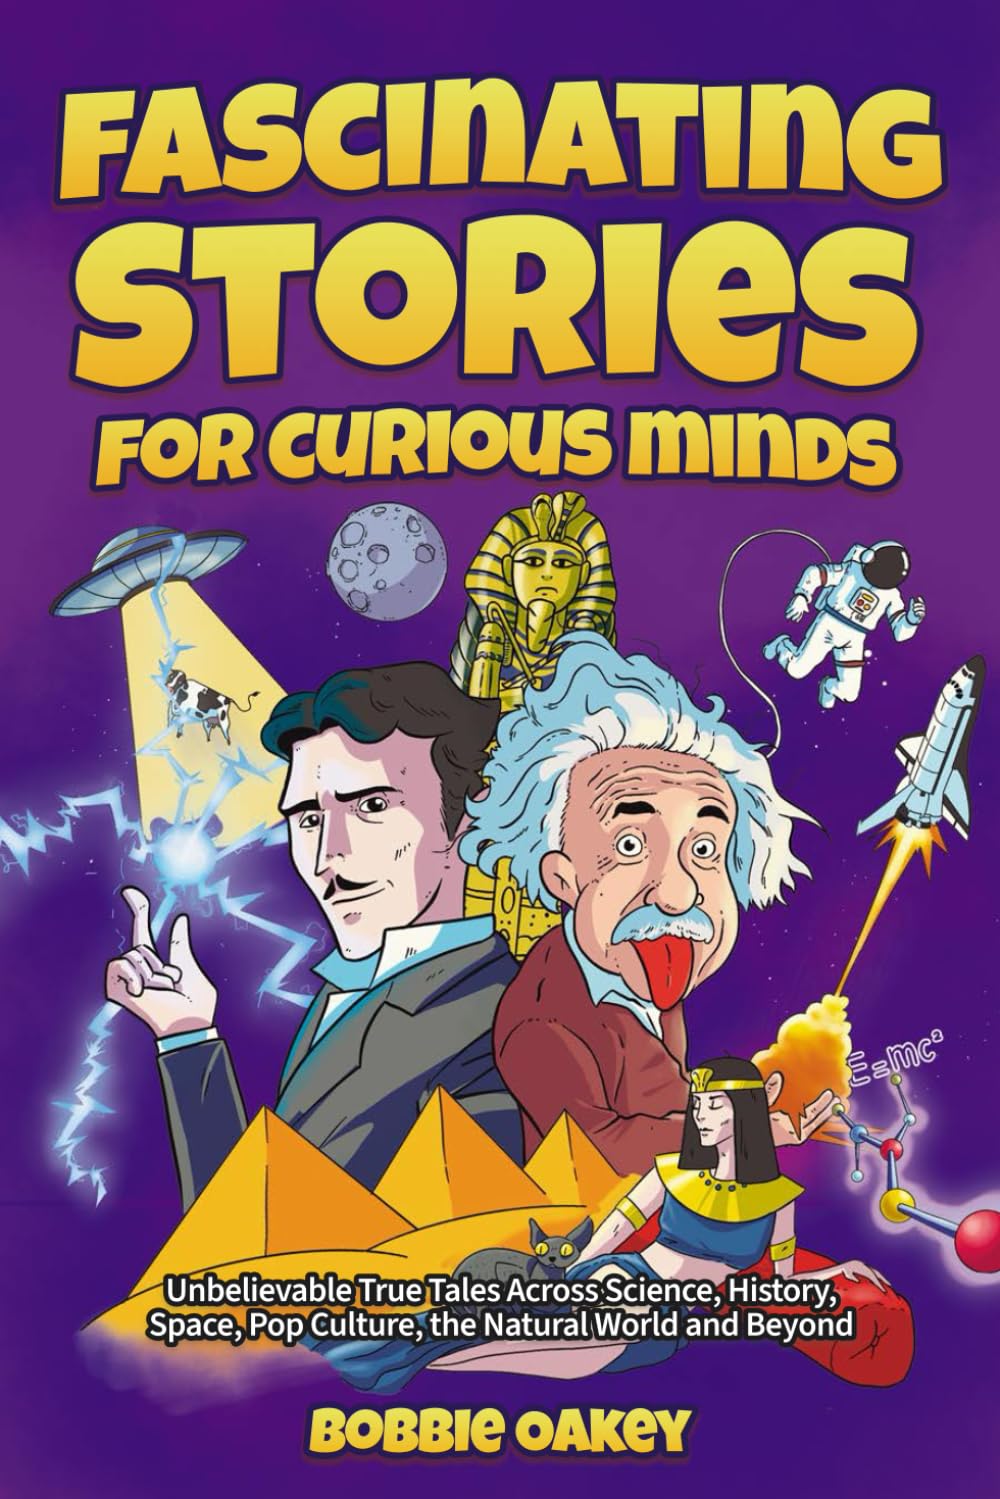 Fascinating Stories for Curious Minds: Unbelievable True Tales Across Science, History, Space, Pop Culture, the Natural World and Beyond